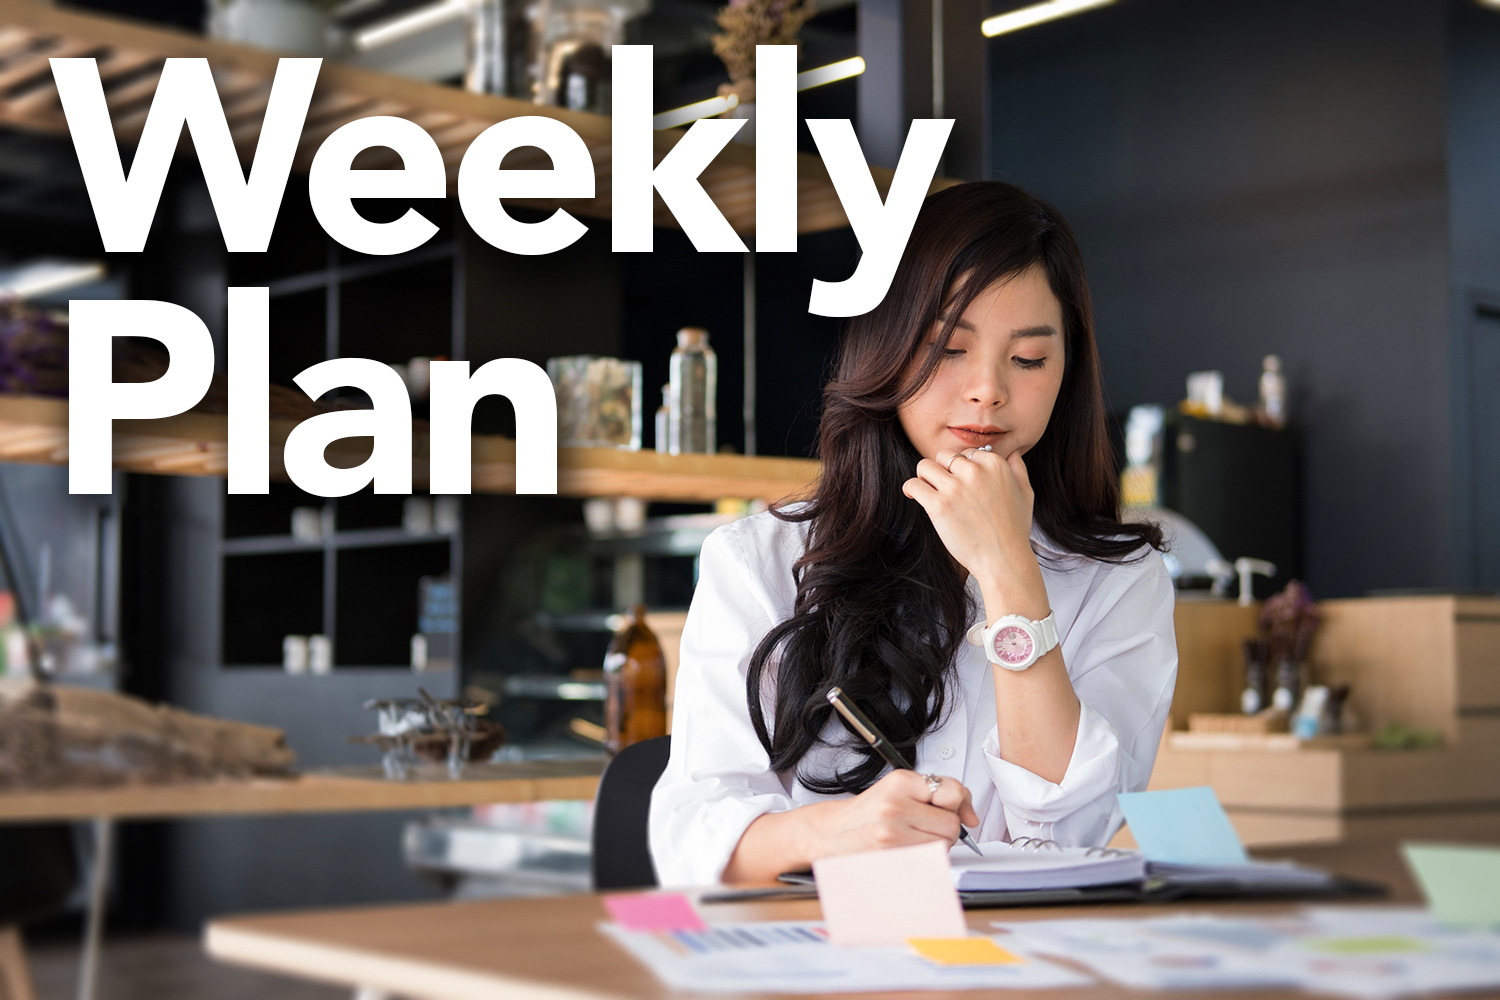 Weekly Planning, Planning your week, scheduling, productivity